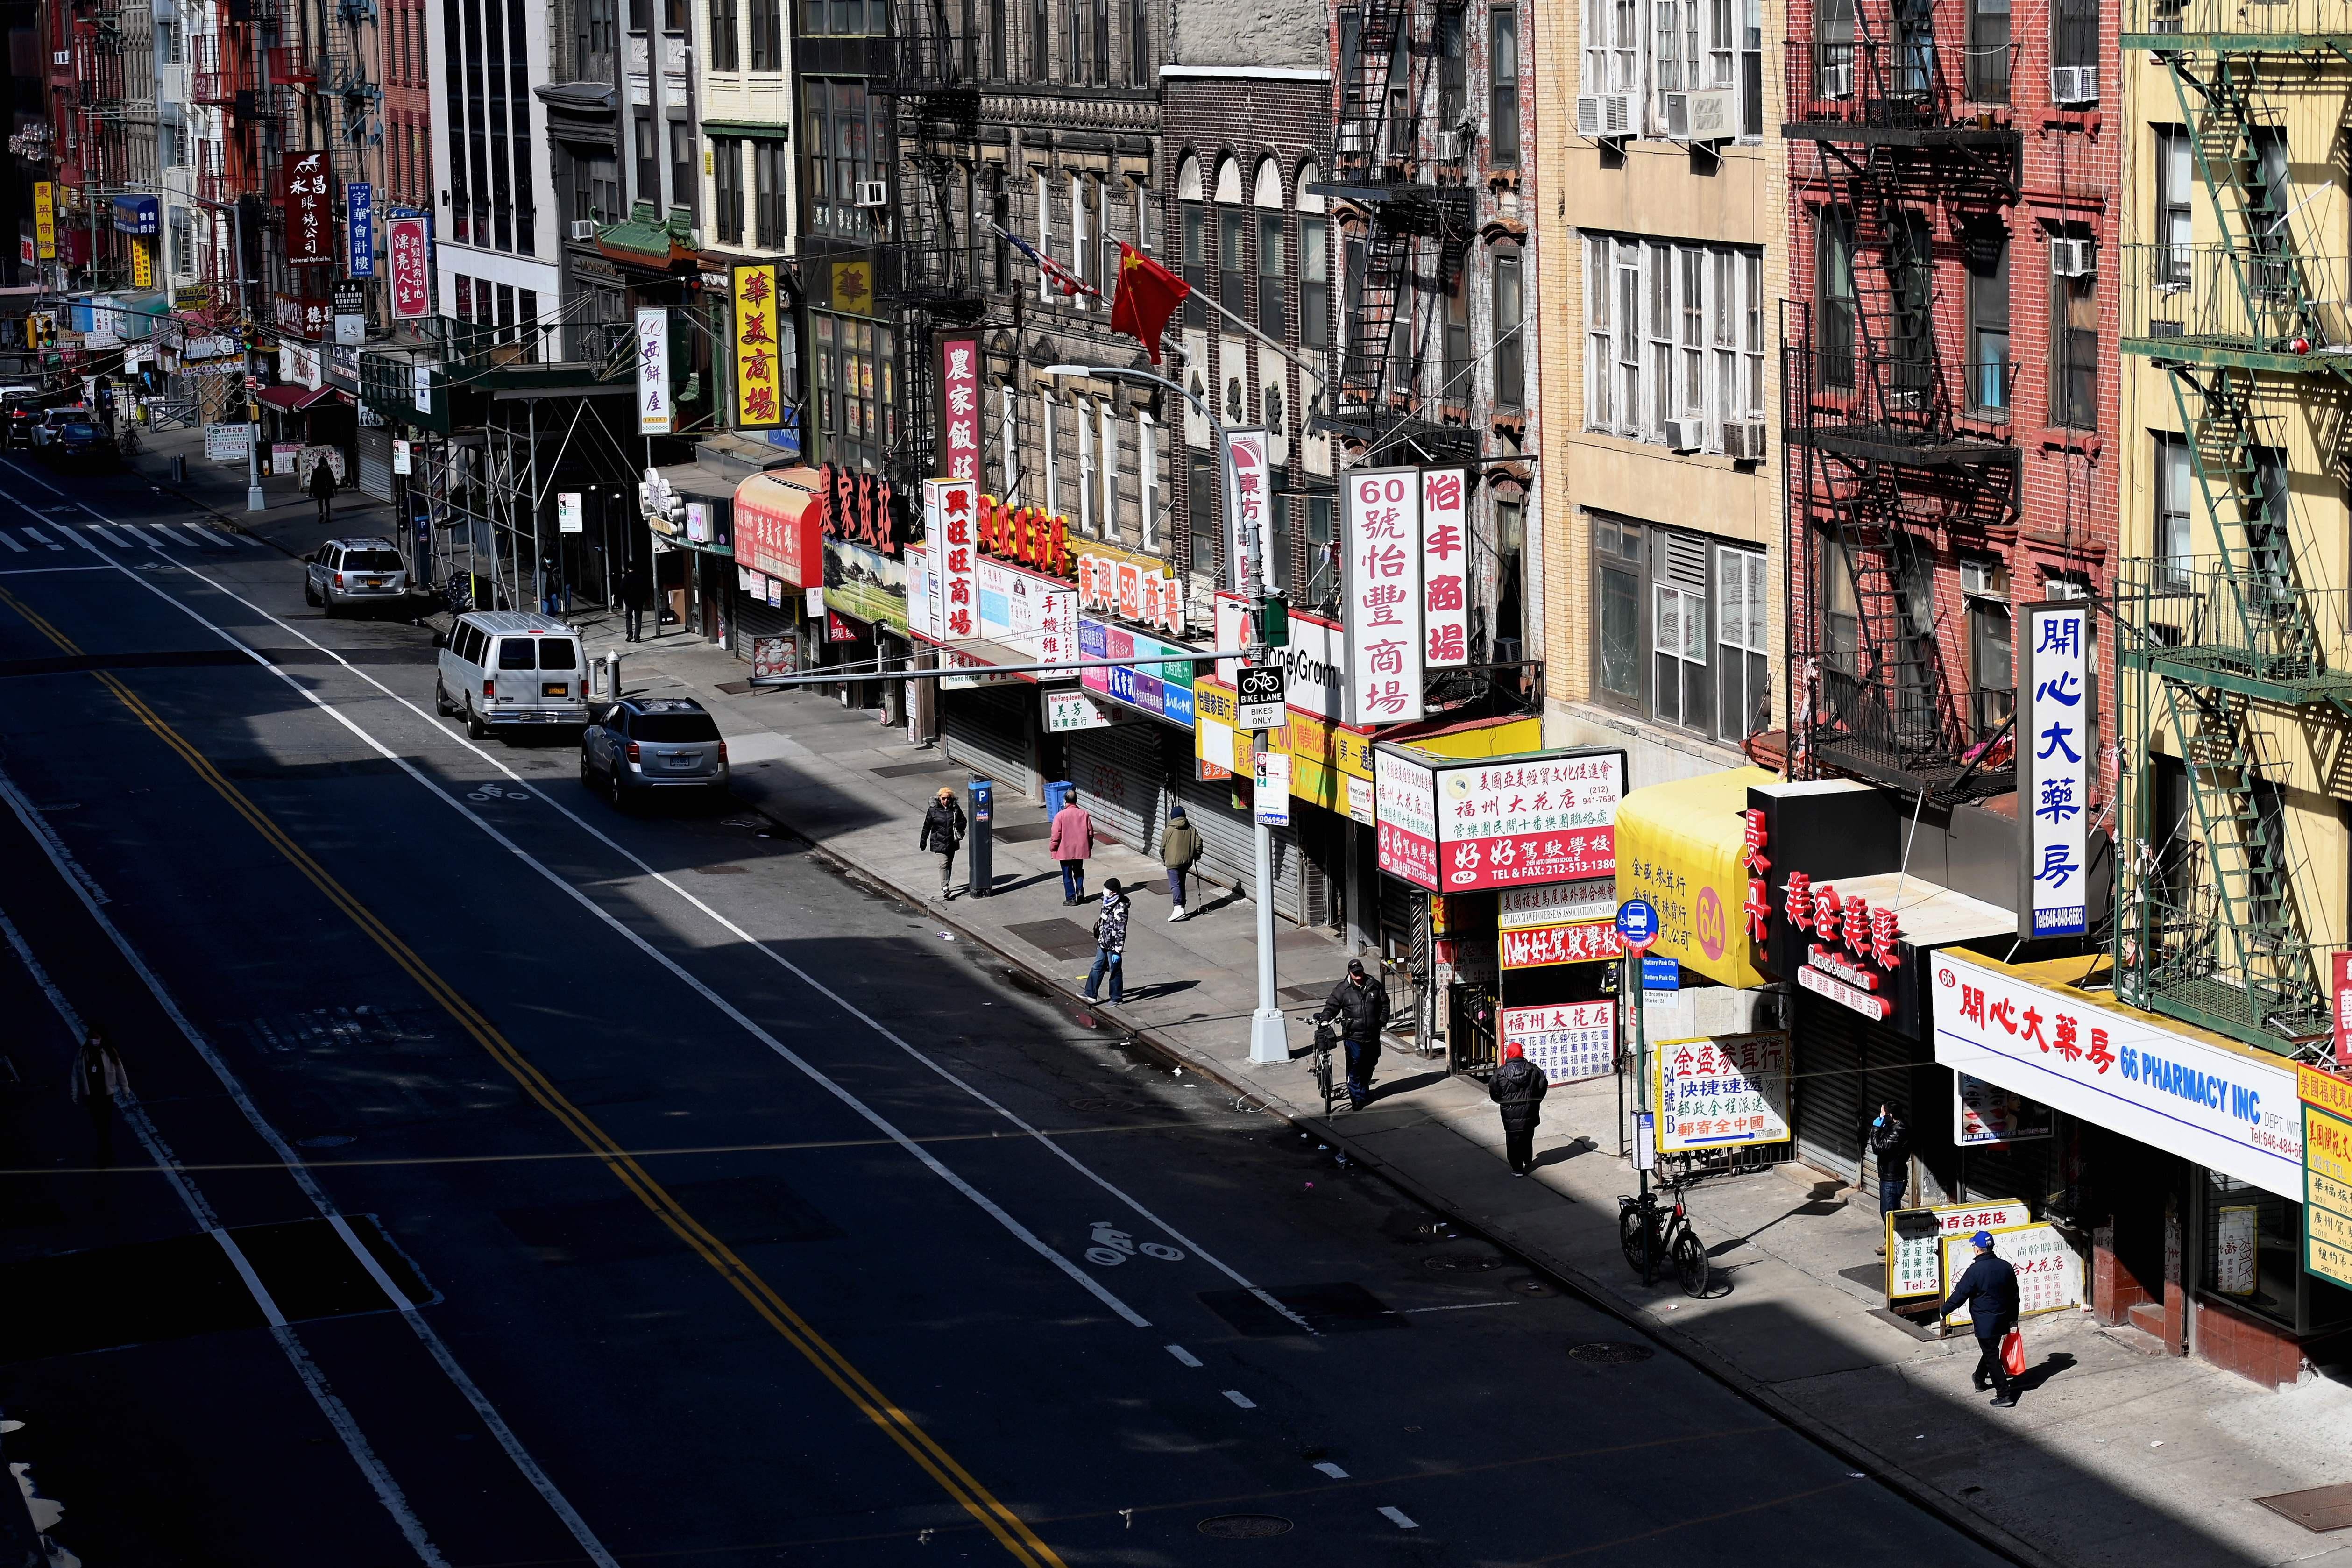 A nearly empty street in Chinatown on March 24, 2020 in New York City. - US lawmakers closed in on a deal Tuesday to help save the teetering economy by injecting nearly $2 trillion into pockets of struggling Americans, devastated businesses and hospitals struggling to contain the coronavirus pandemic. (Photo by Angela Weiss / AFP) (Photo by ANGELA WEISS/AFP via Getty Images)